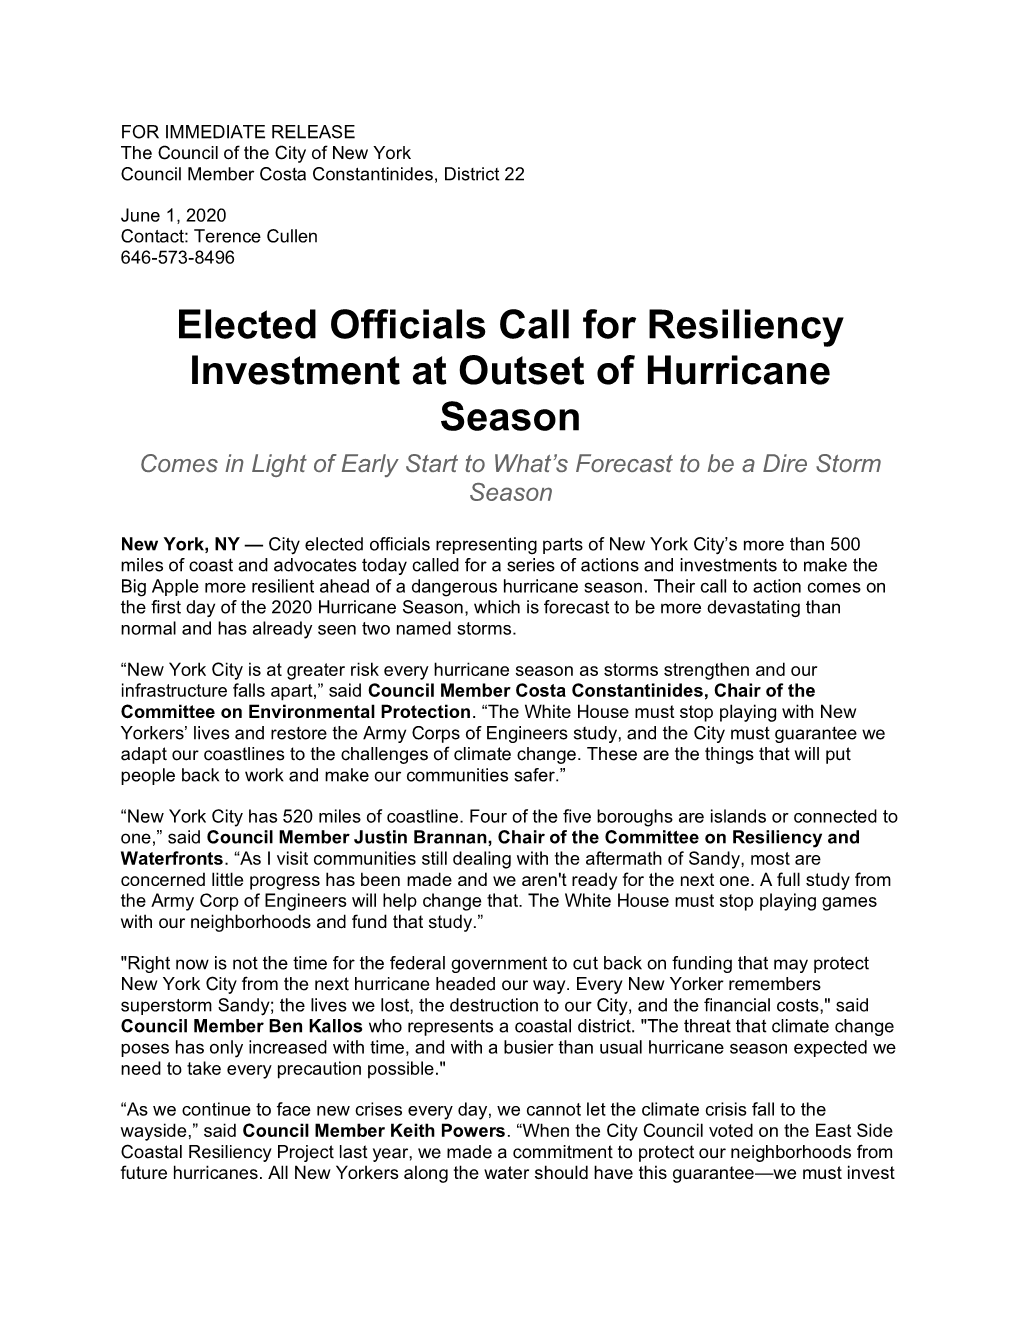 Elected Officials Call for Resiliency Investment at Outset of Hurricane Season Comes in Light of Early Start to What’S Forecast to Be a Dire Storm Season